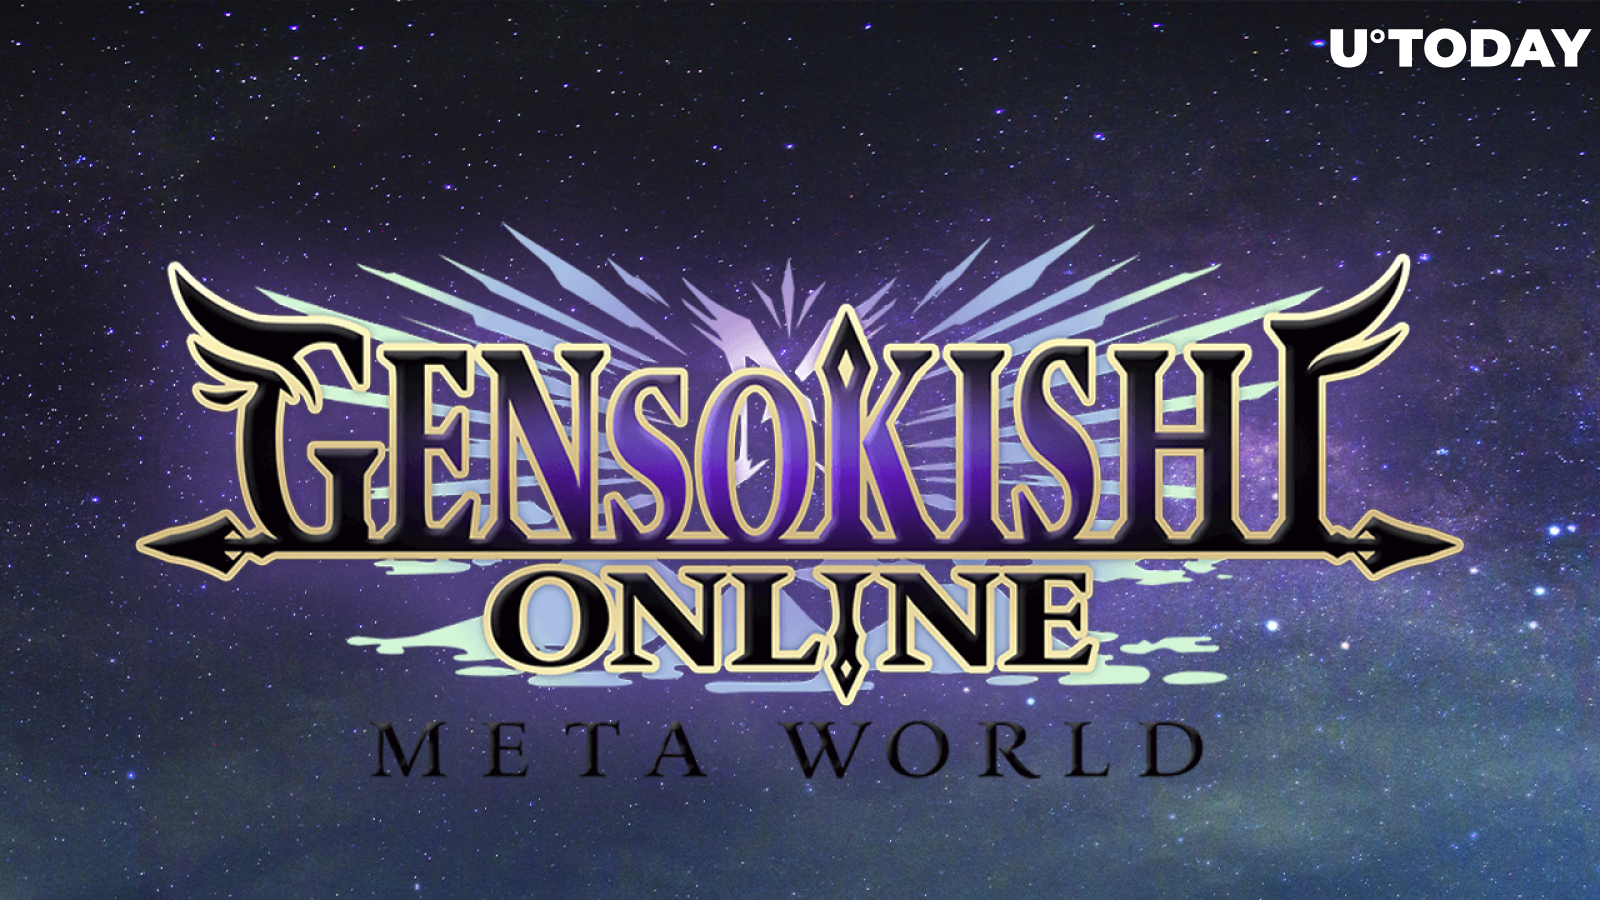 GensoKishi Online Introduces Novel Game at Intersection of Metaverse and “Play-to-Earn”